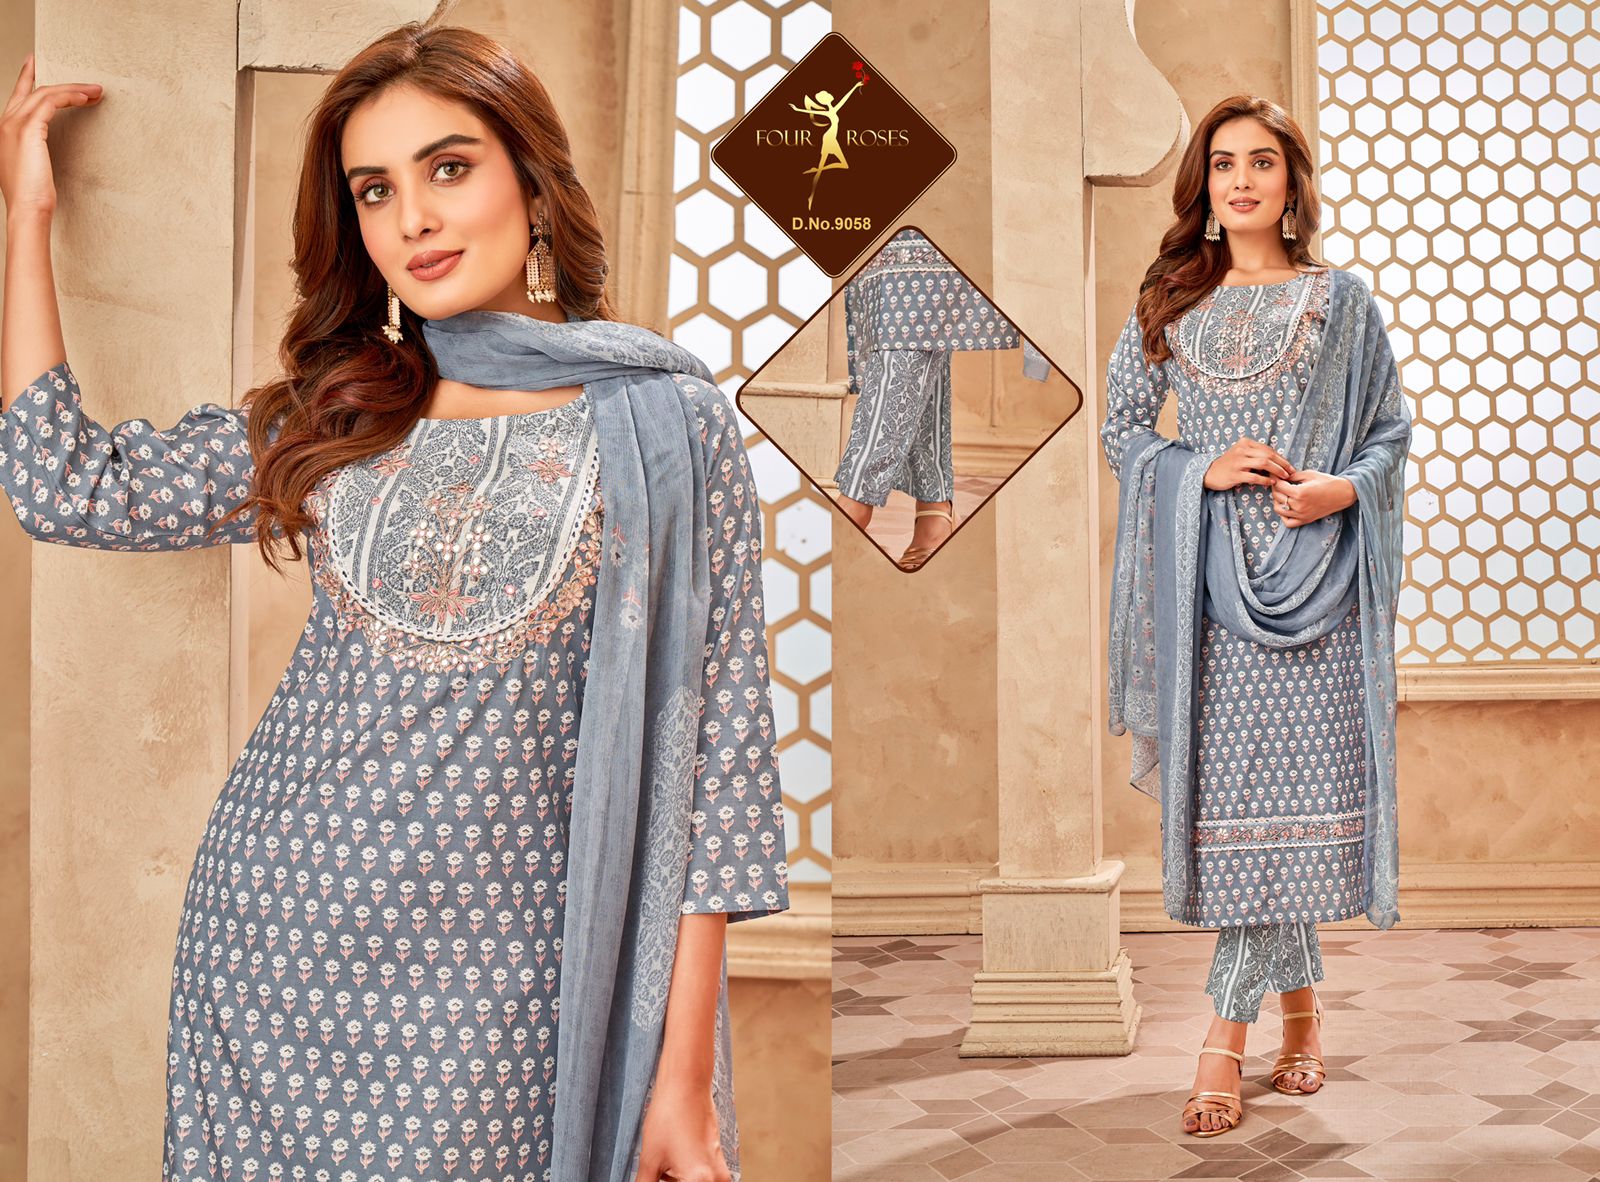 four roses four roses D No 9058 9059 cotton new and modern style top bottom with dupatta catalog